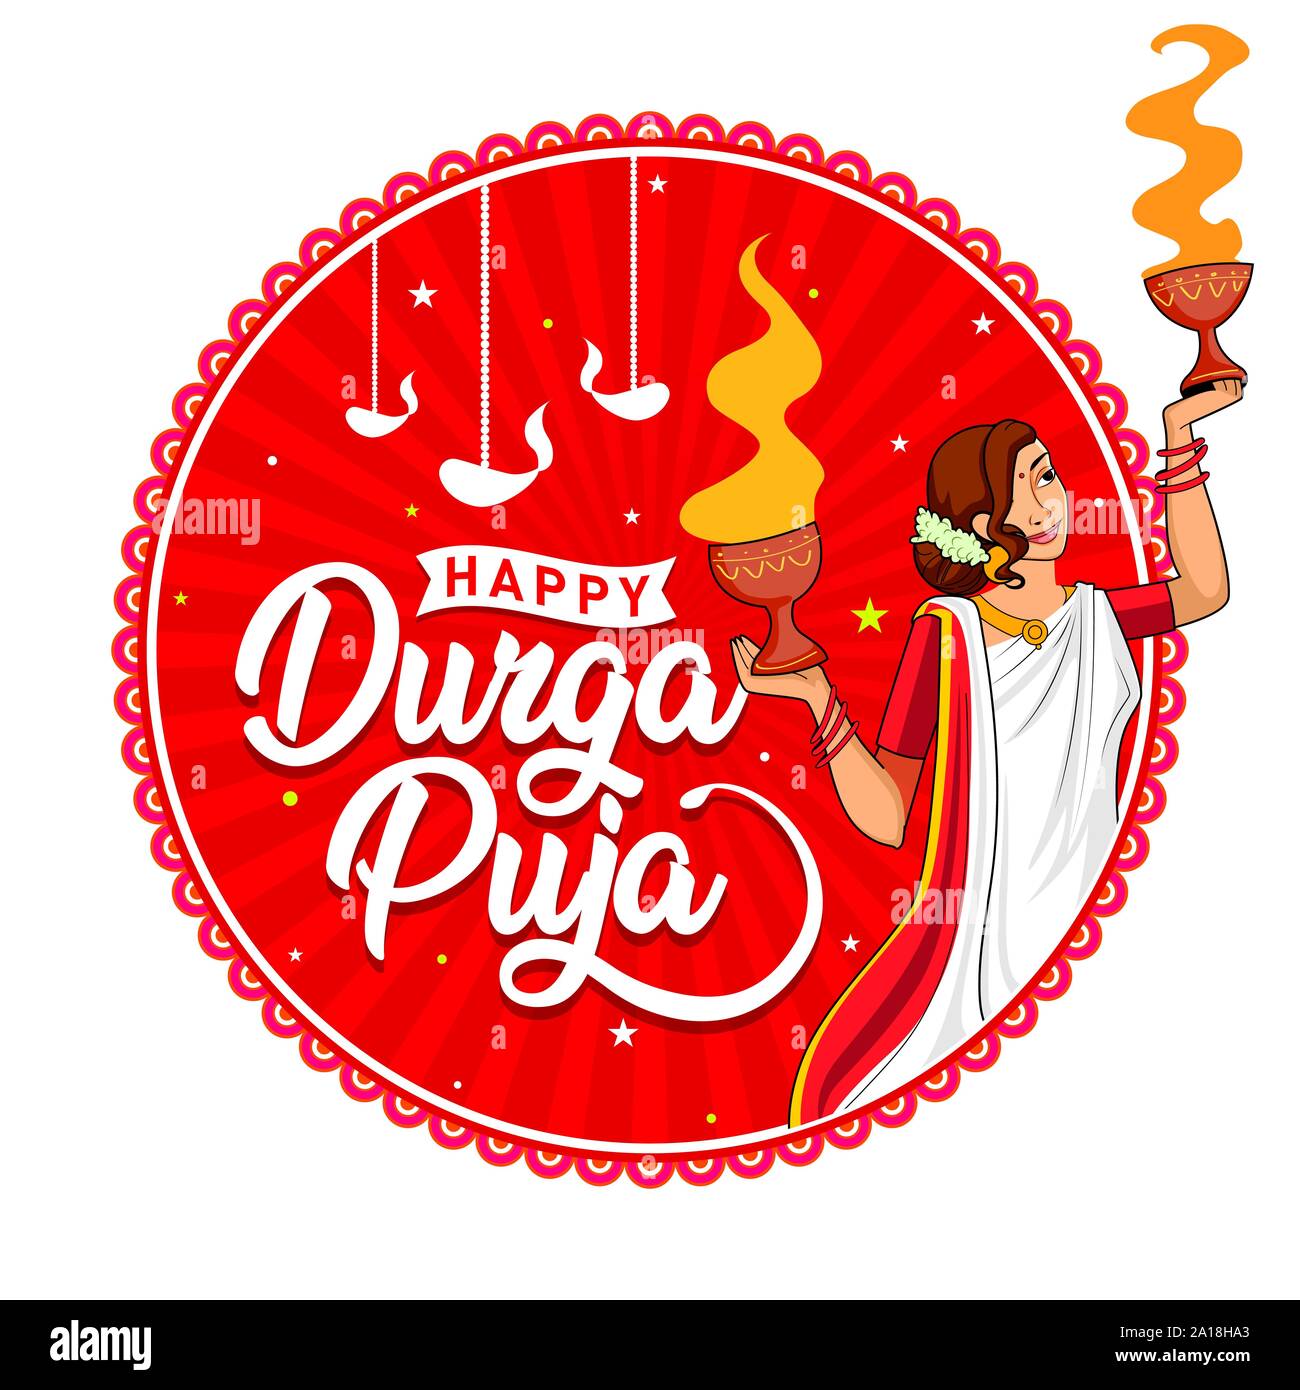 Indian Festival Celebration. Happy Durga Puja Discounts Logo Design, Banner, Sticker, Concept, Greeting, Icon, Poster, Unit, Web on red background. Stock Vector